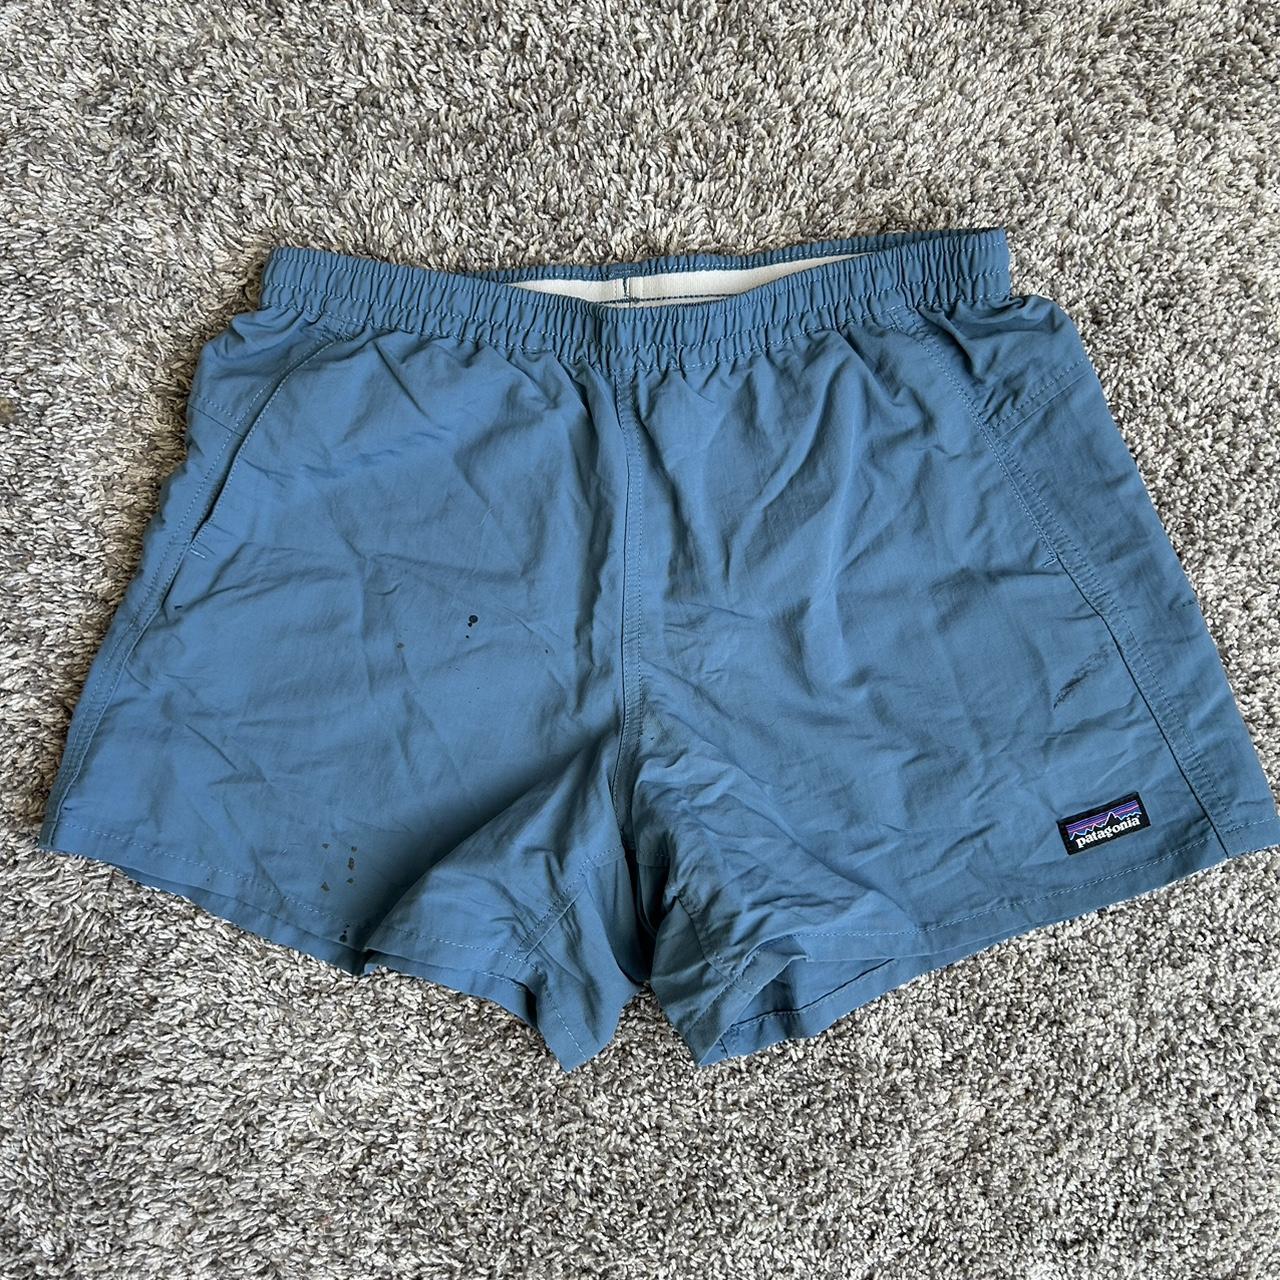 Size Small Sky blue Patagonia women’s shorts| Minor... - Depop